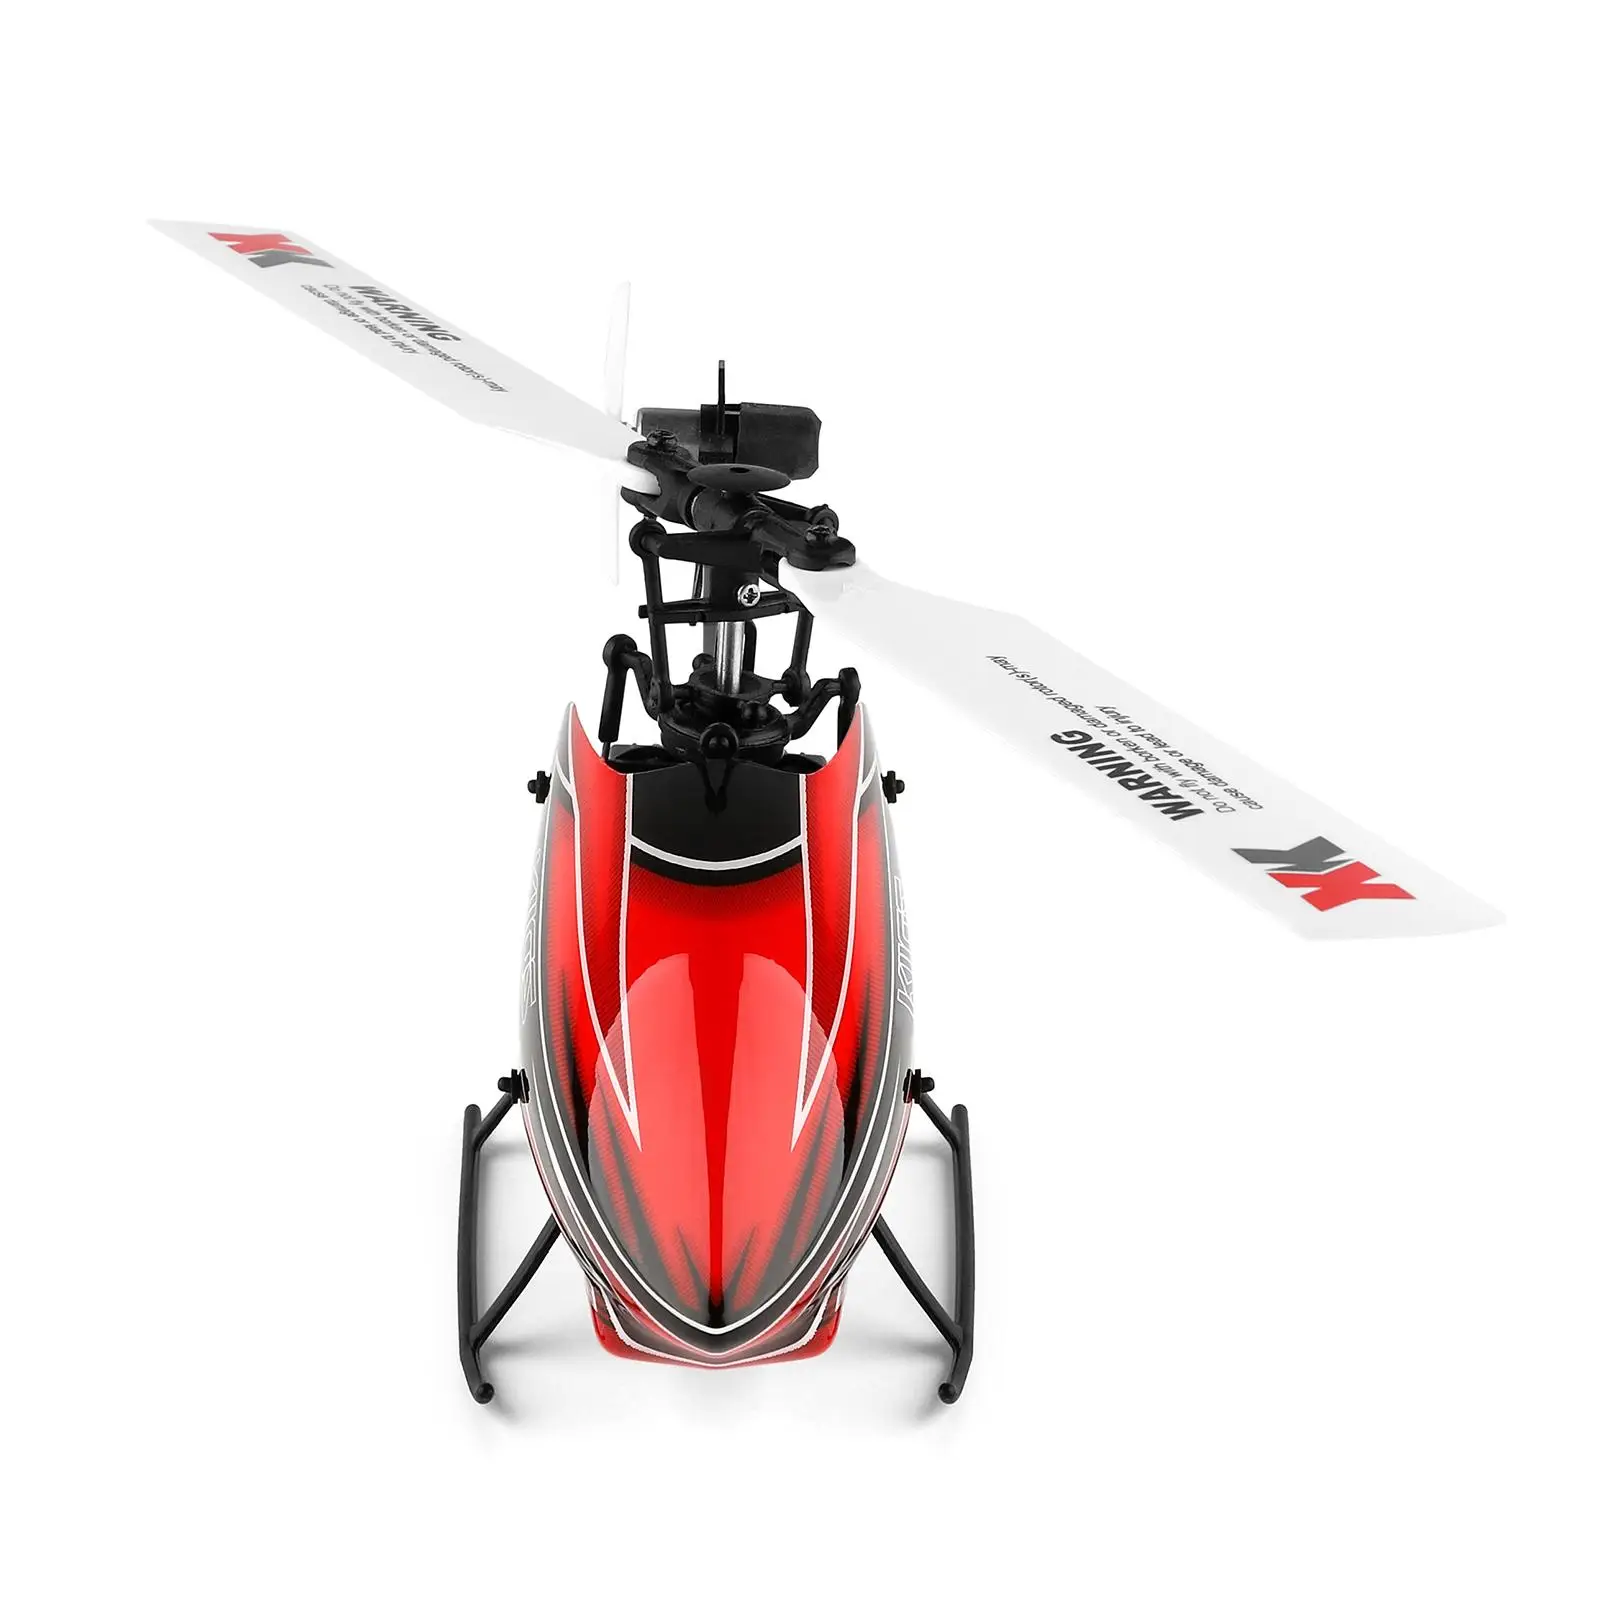 Remote Control Helicopter 6G System 6CH 3D Lightweight for Outdoor Adults